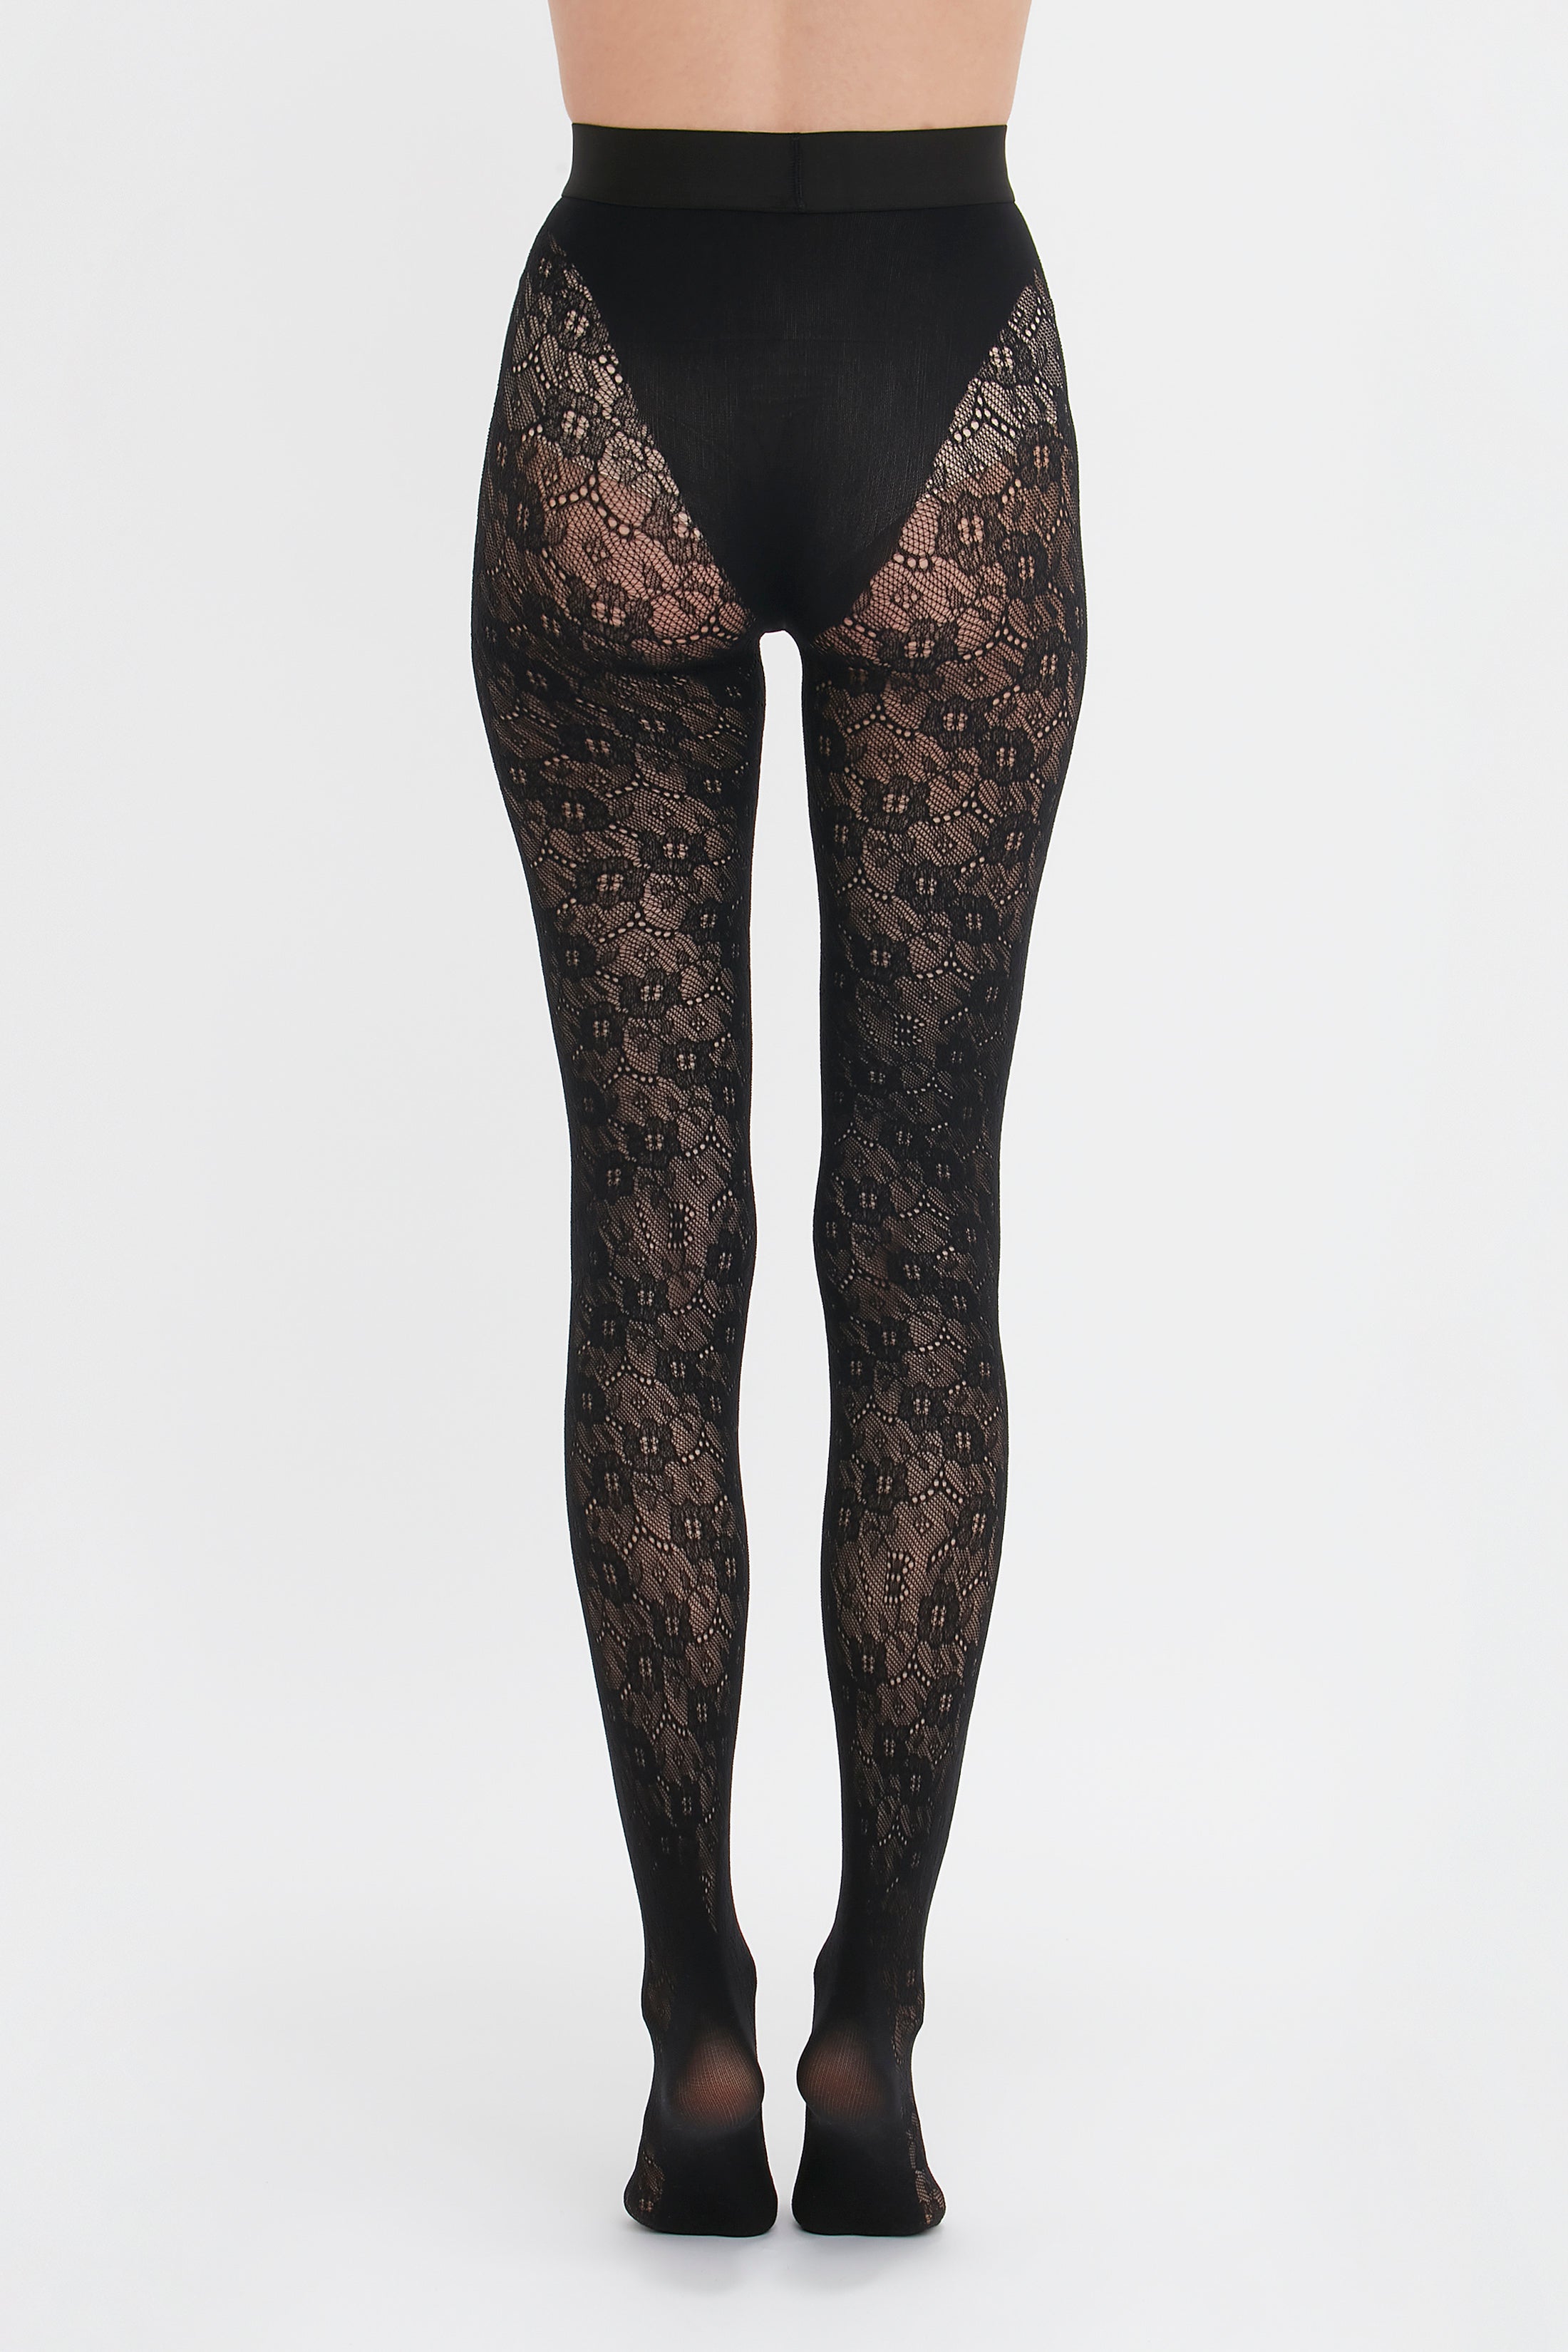 Black Lace Pattern Tights 1 Pack